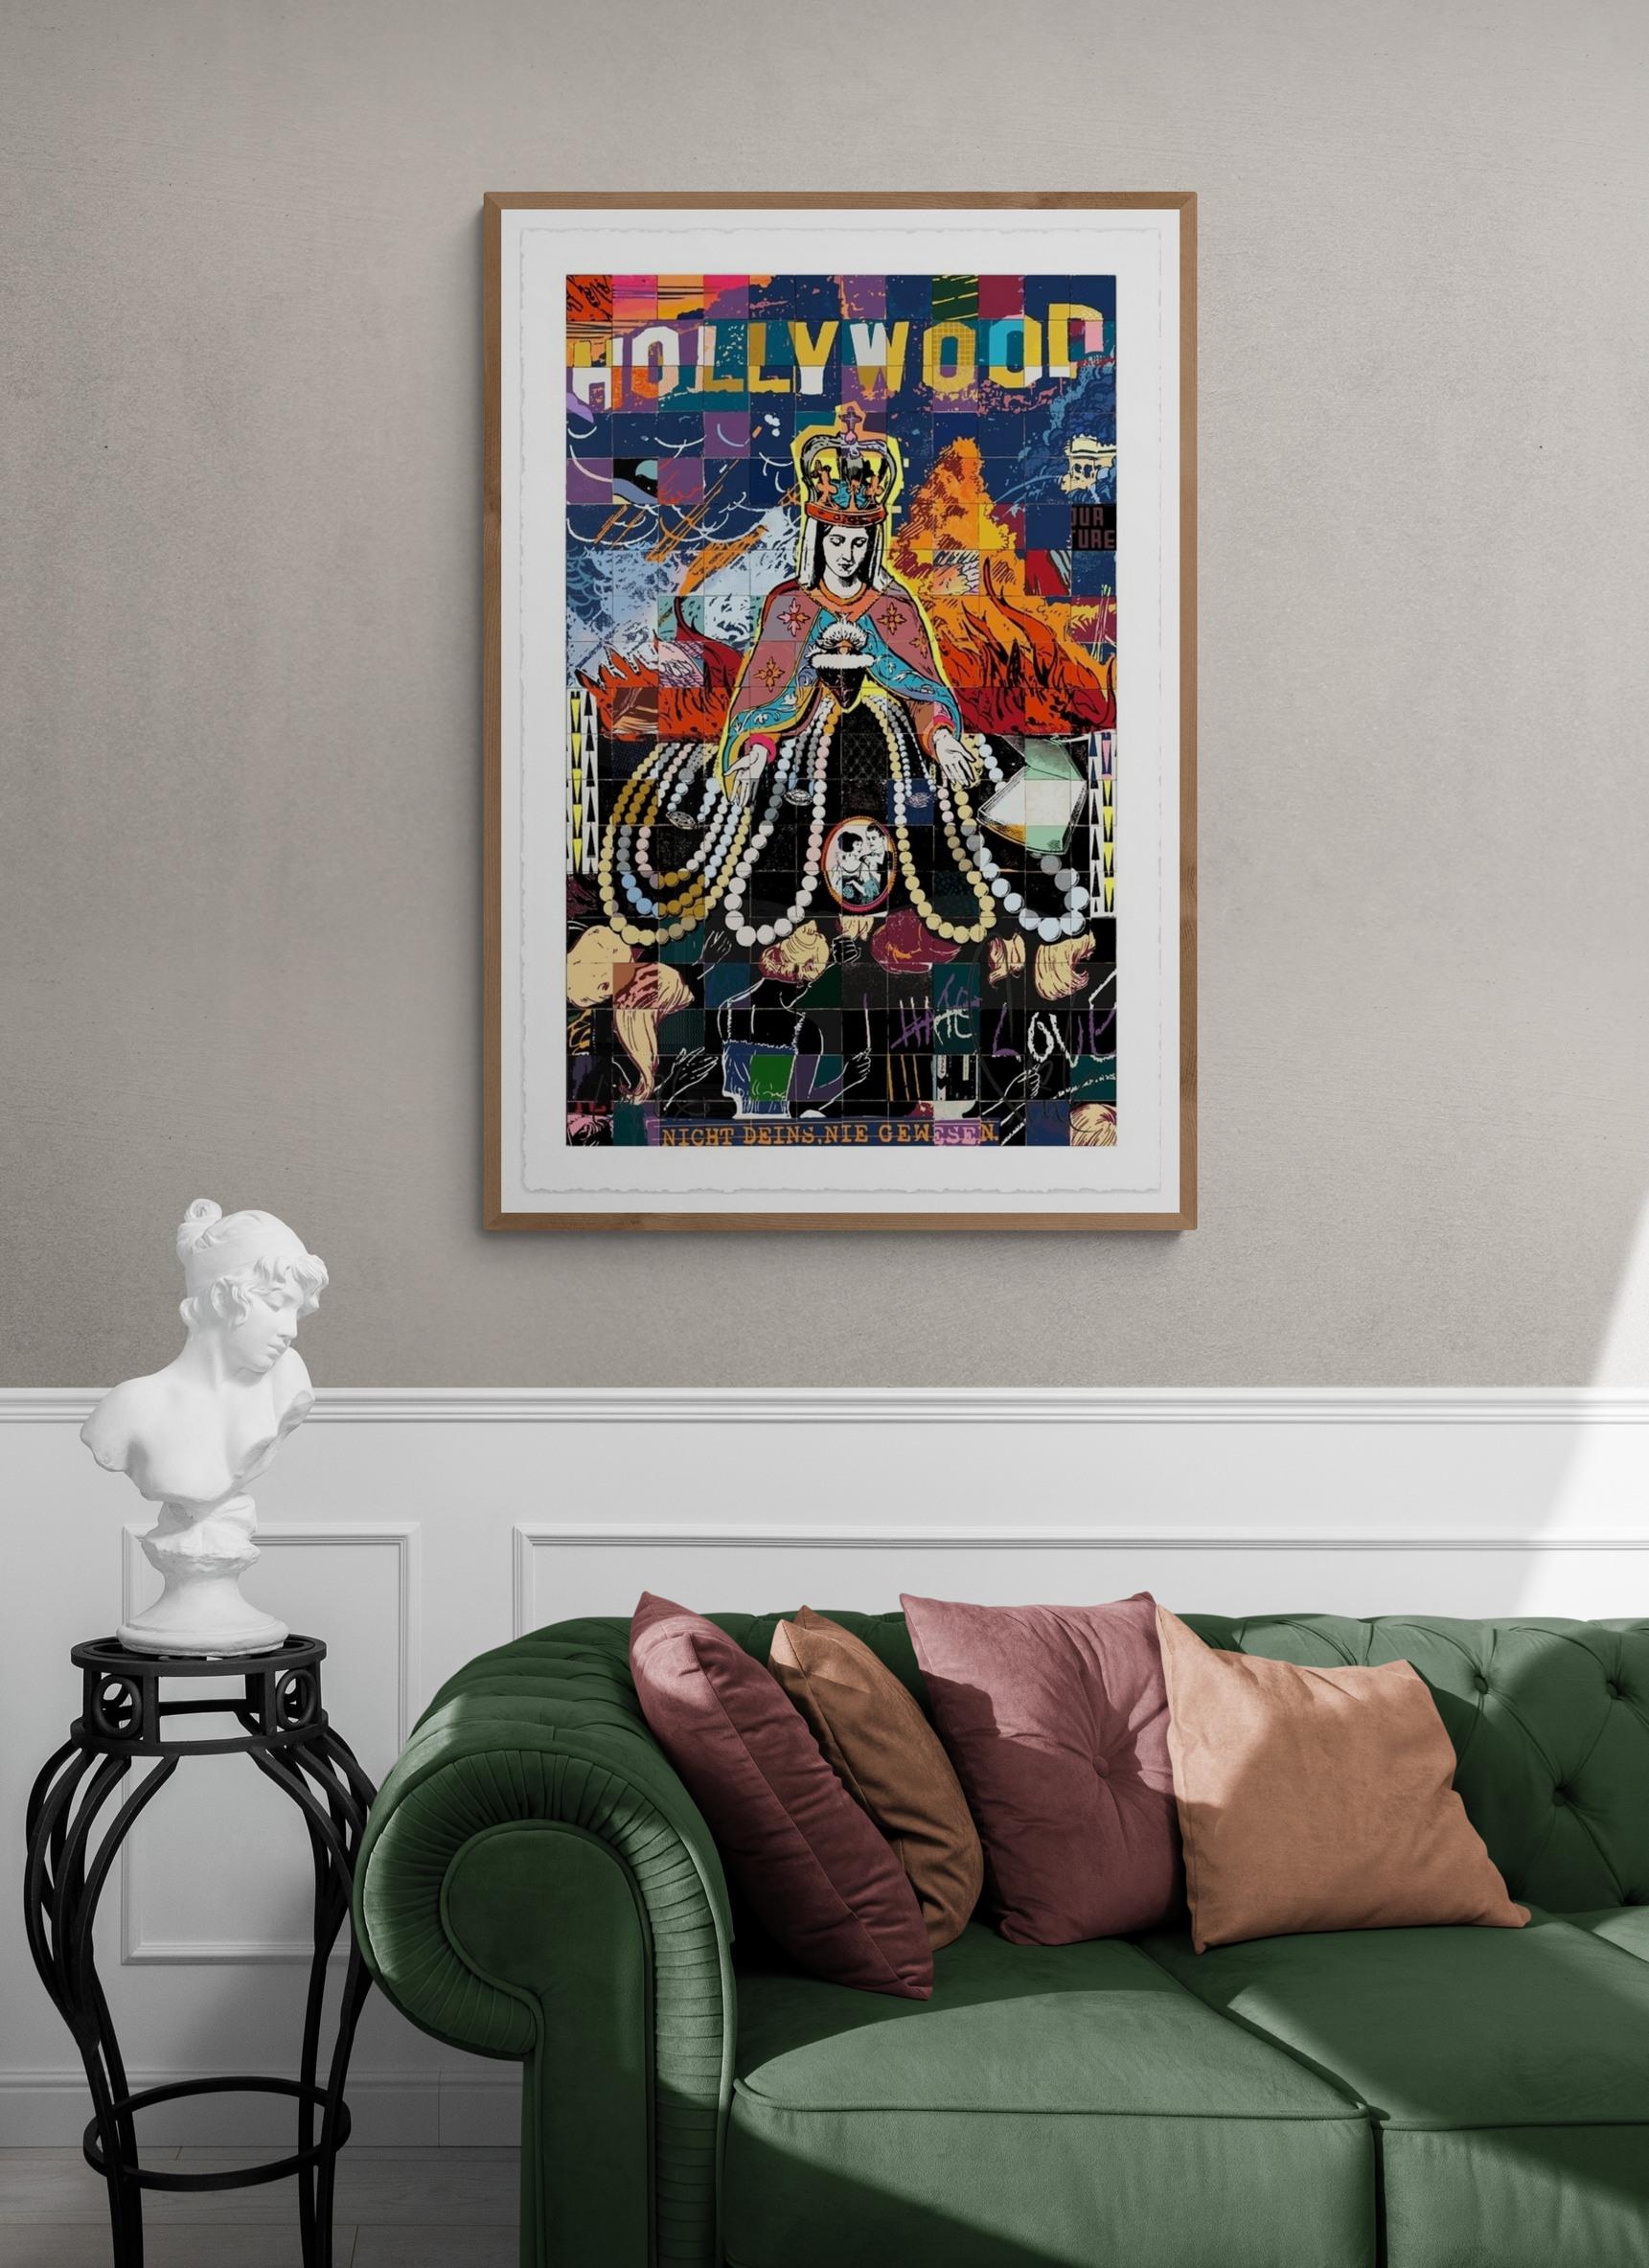 FAILE - HOLLYWOOD NIGHTS
Date of creation: 2021
Medium: Archival ink print on Entrada 290gsm Cotton Rag
Edition: 400
Size: 106.7 x 71.1 cm
Condition: In mint conditions, brand new and never framed
Observations:
42 color Archival Ink print on Entrada